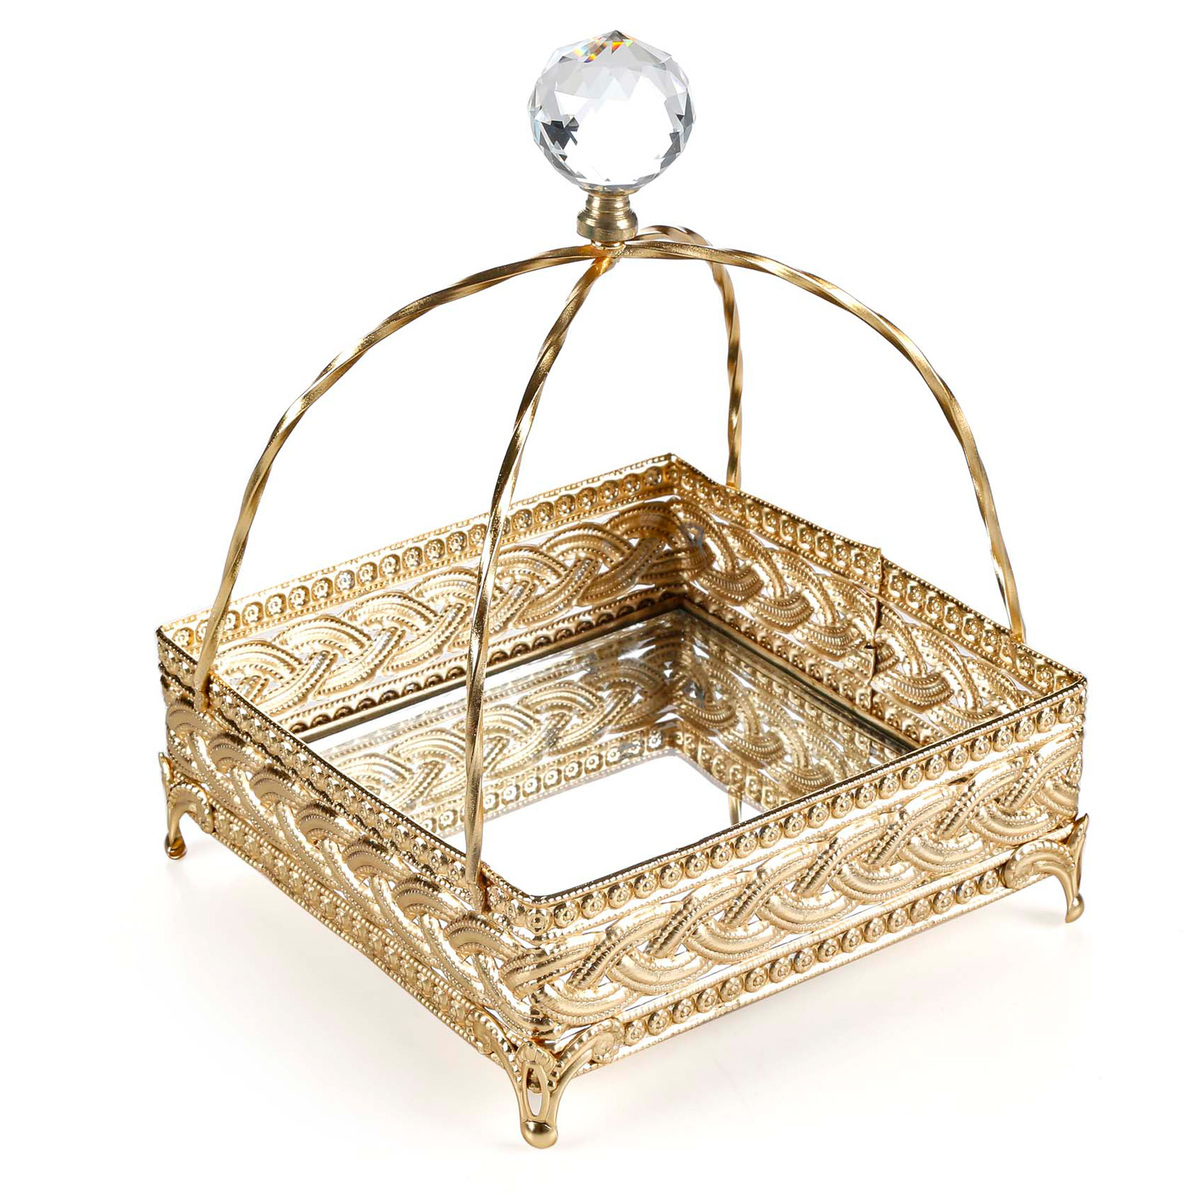 Glascom Steel with Gold Plated Decorative Tray, 14 x 14 cm, FV12G